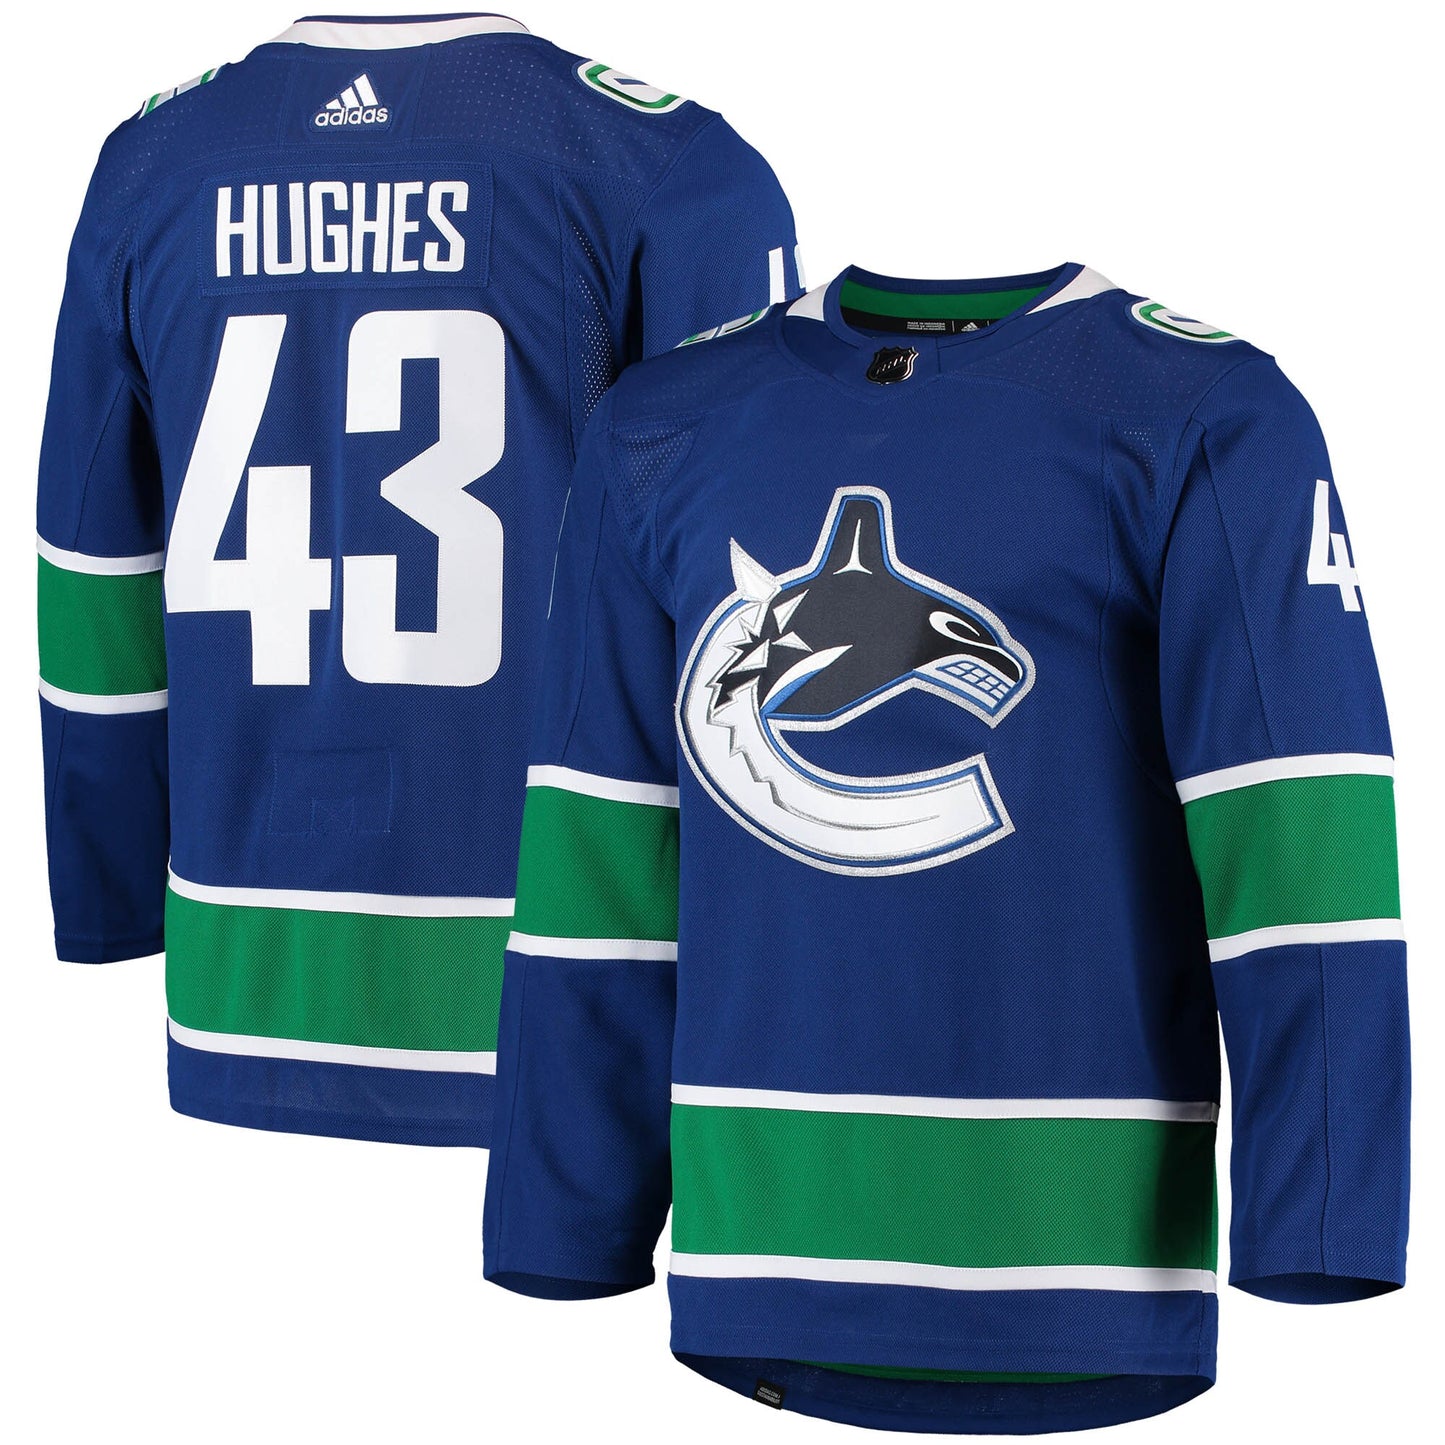 Quinn Hughes Vancouver Canucks adidas Home Primegreen Authentic Pro Player Jersey - Blue